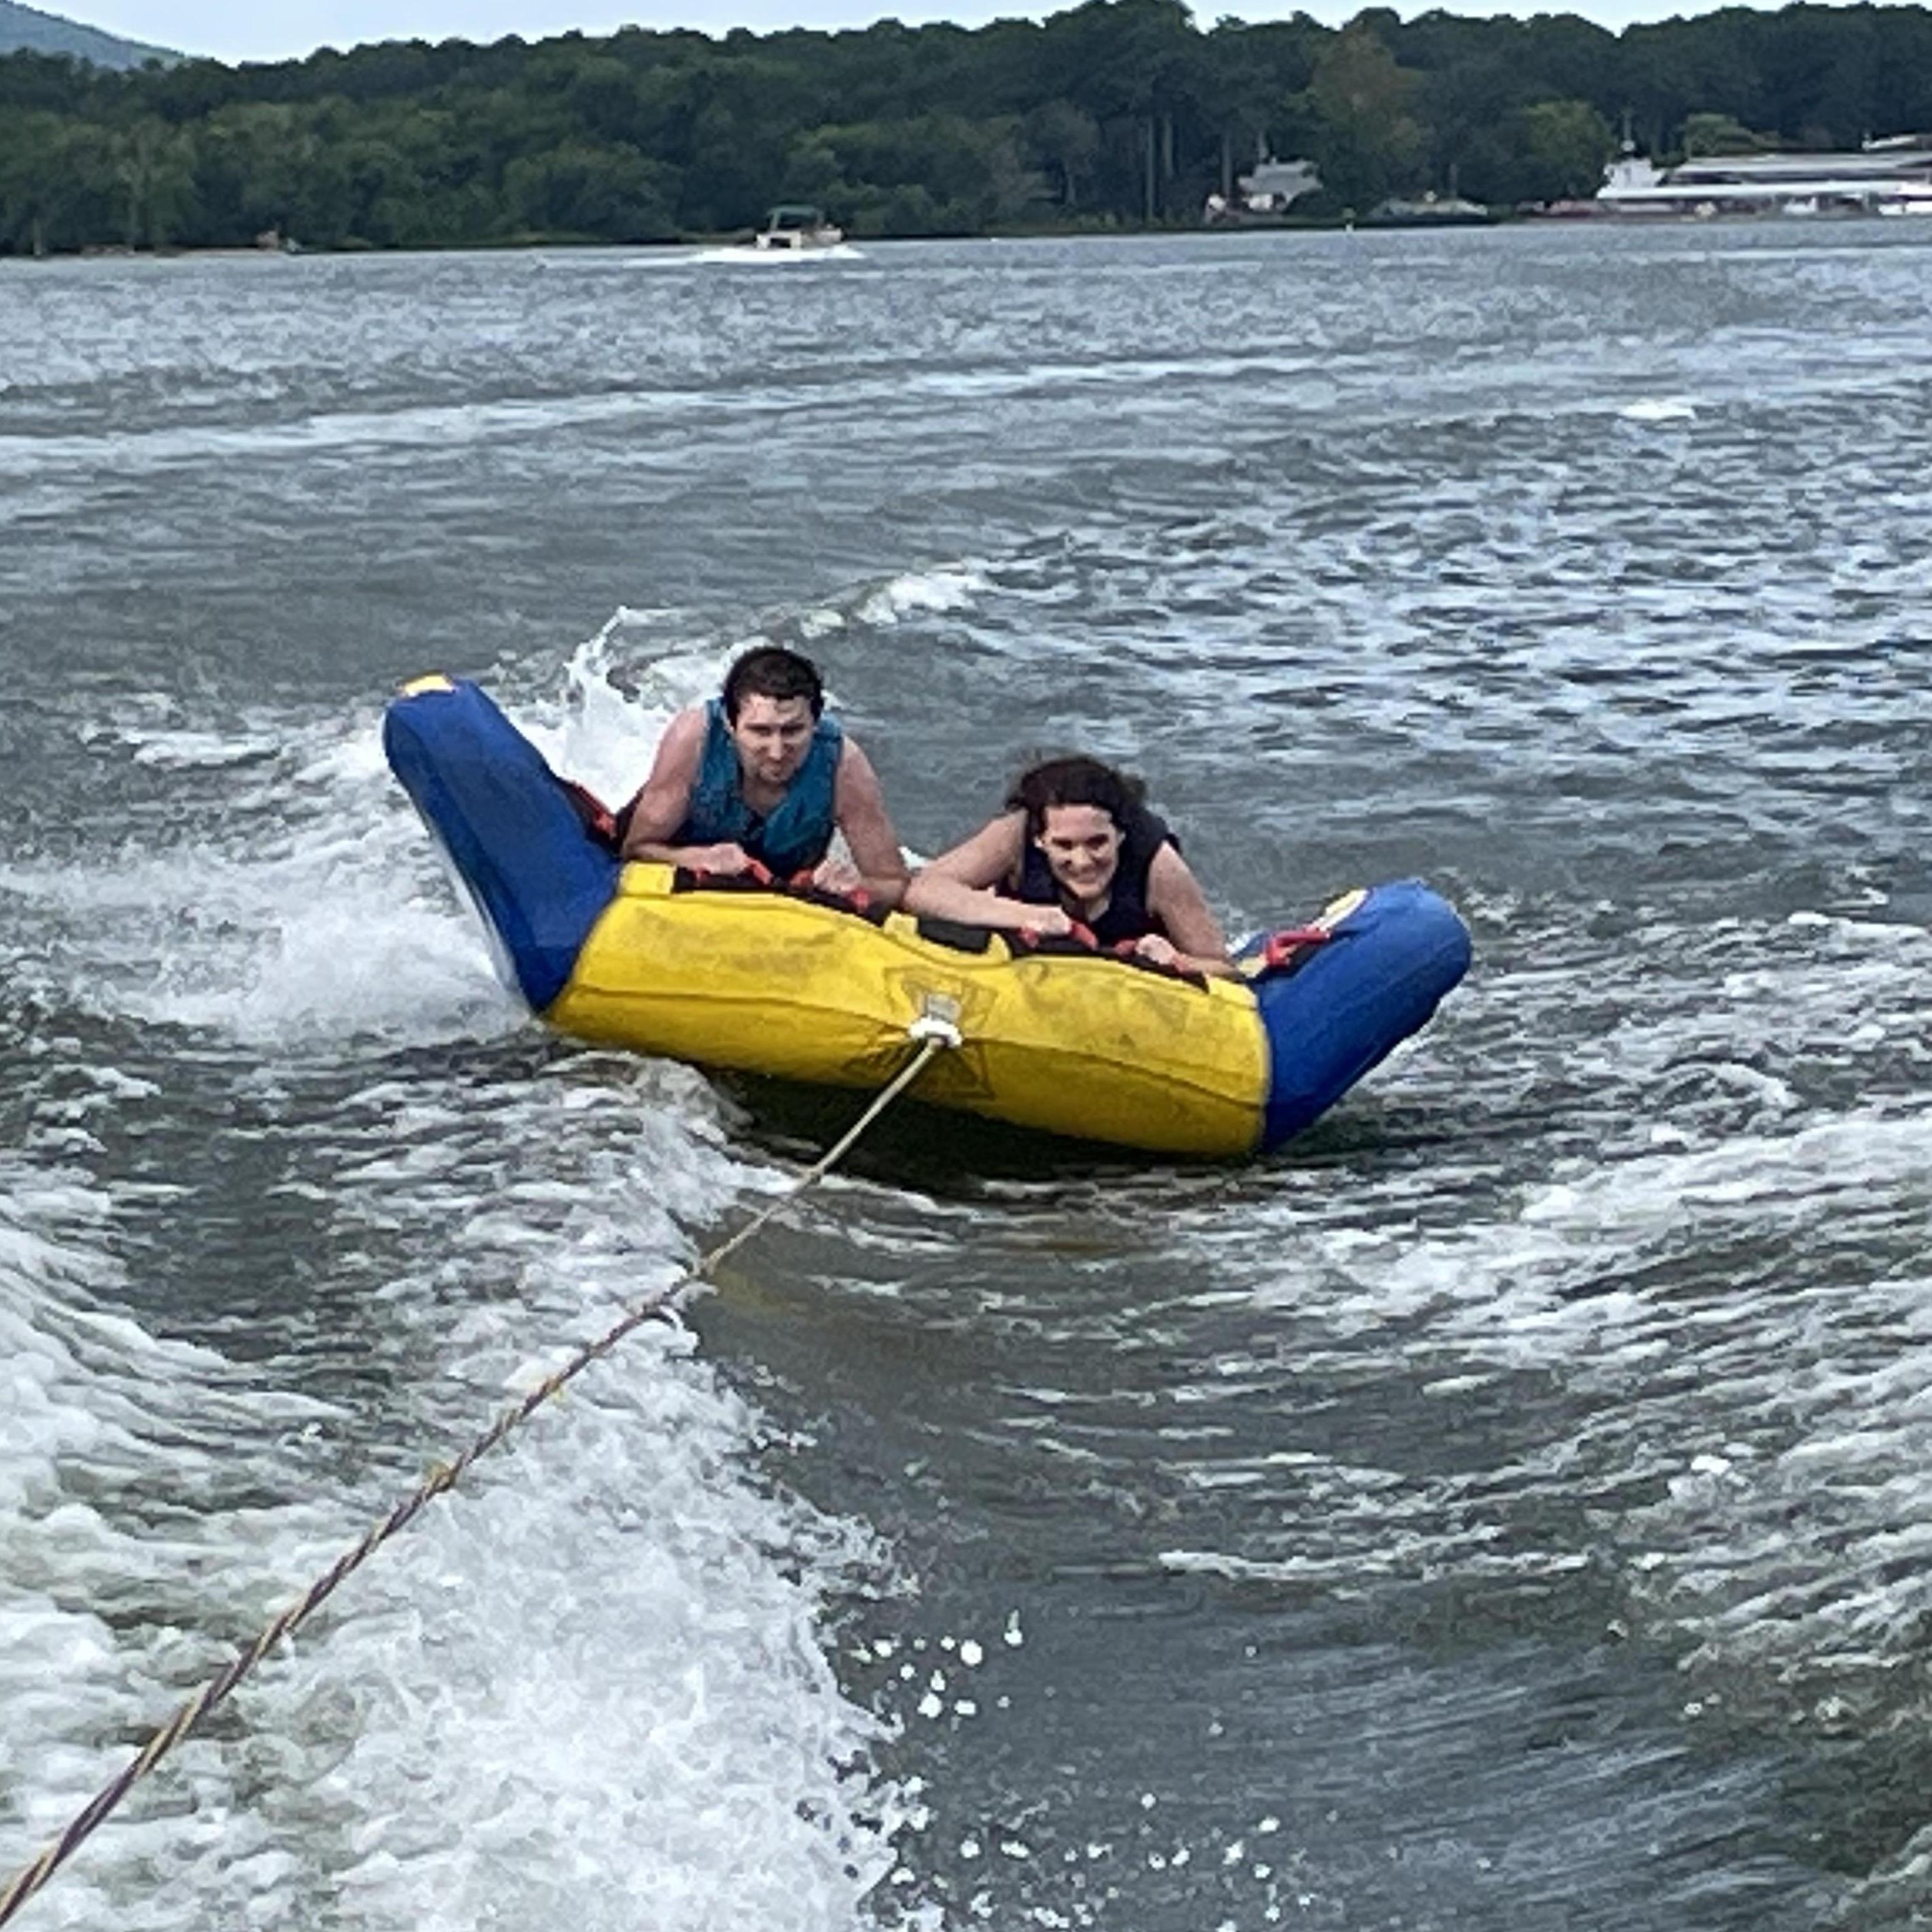 Tubing on Lake Guntersville. Laura screamed the entire time, but Matt's elbows took the worst beating :-)